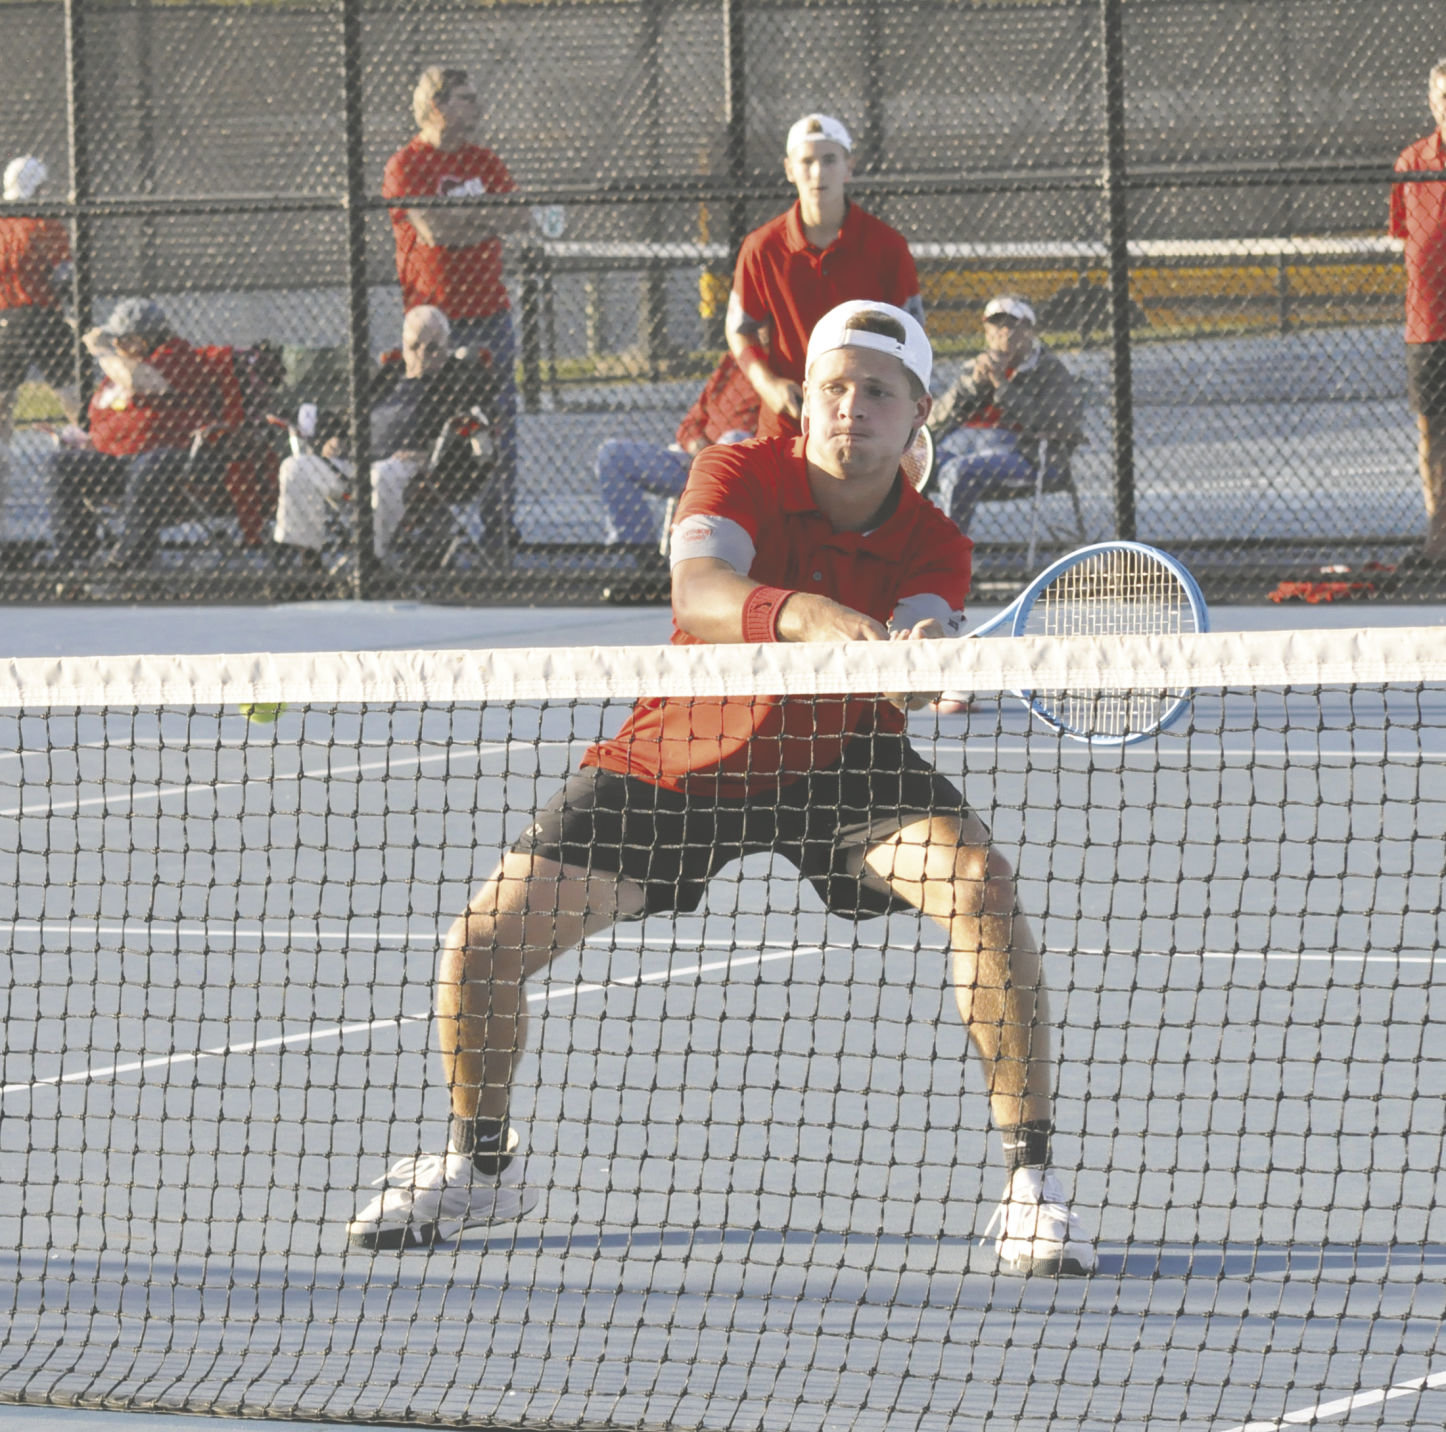 Southmont's Reese Long and Micah Korhorn gave the Mounties the decisive match point with a win at No. 1 doubles in the 4-1 win over Northview.